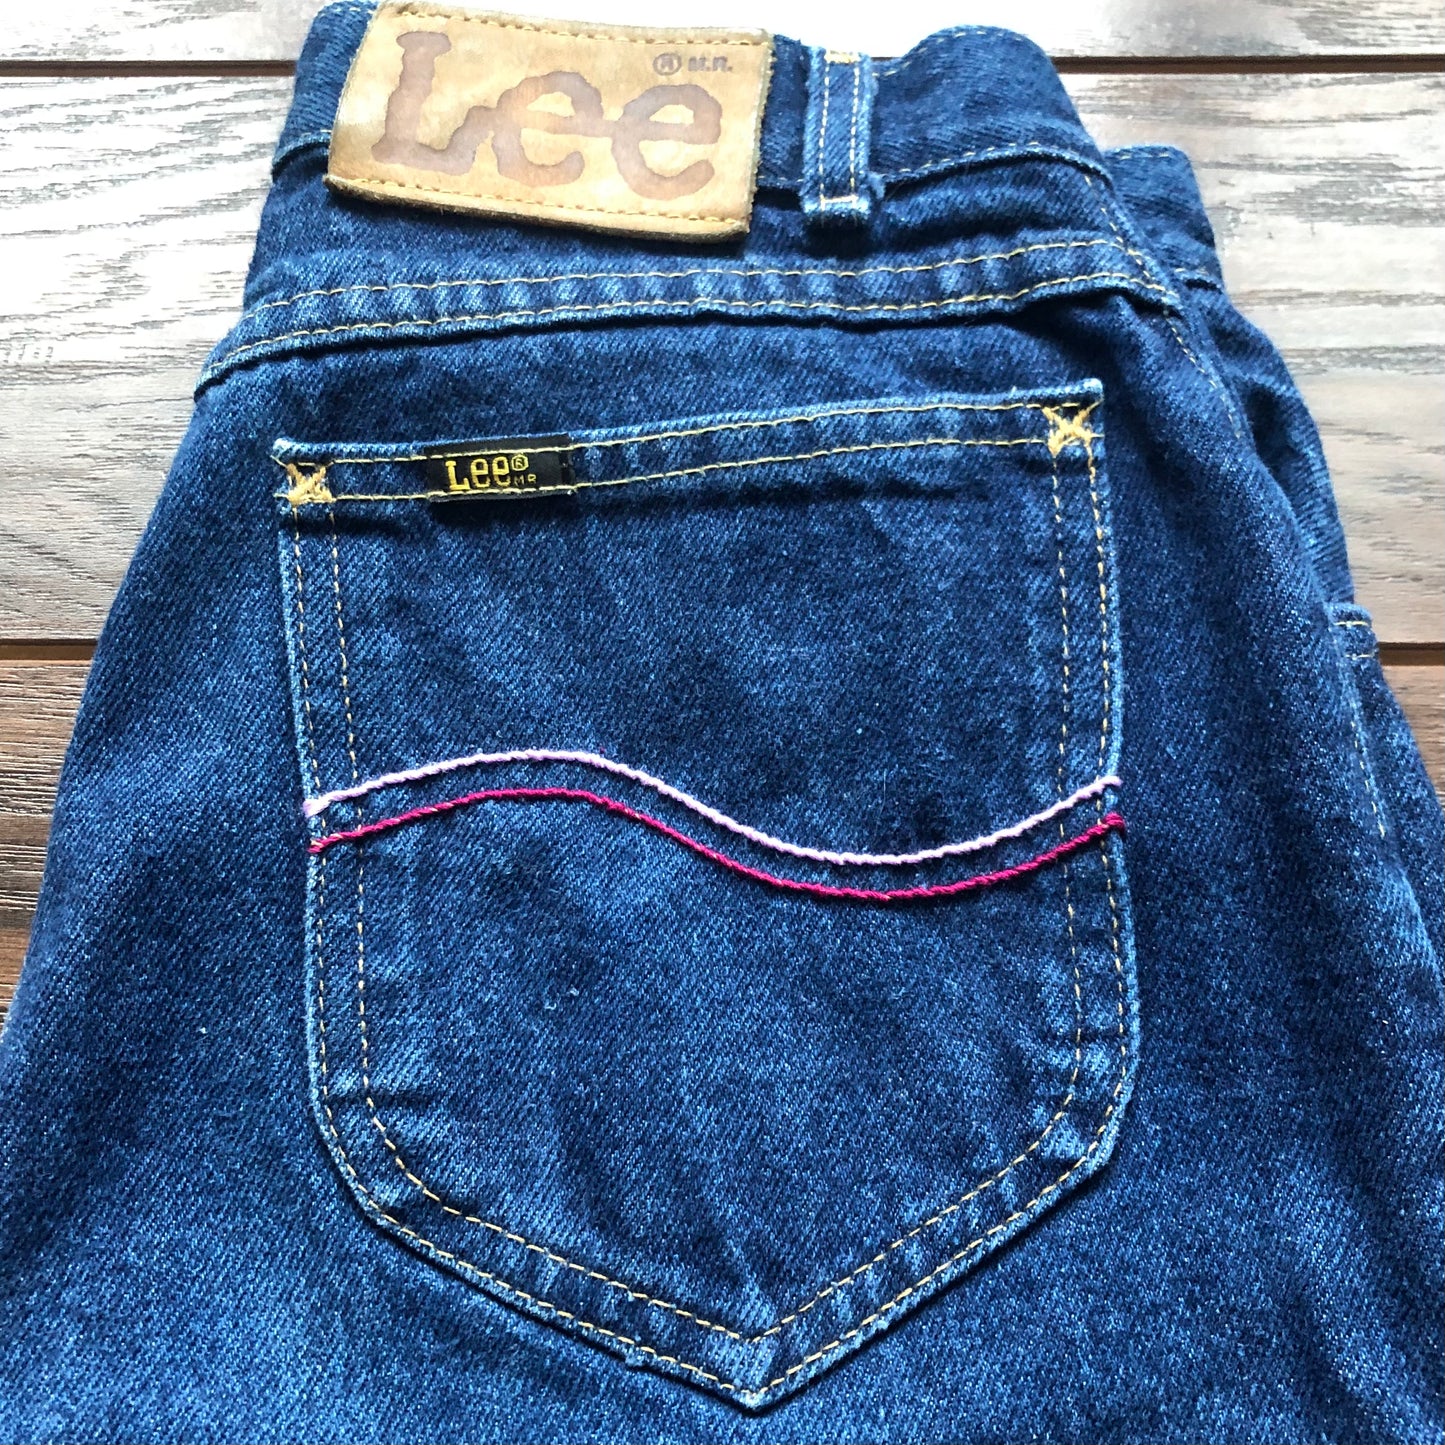 Vintage Western Women’s High Waisted Lee Jeans with Embroidered Back Pockets| Made in USA-Union Made